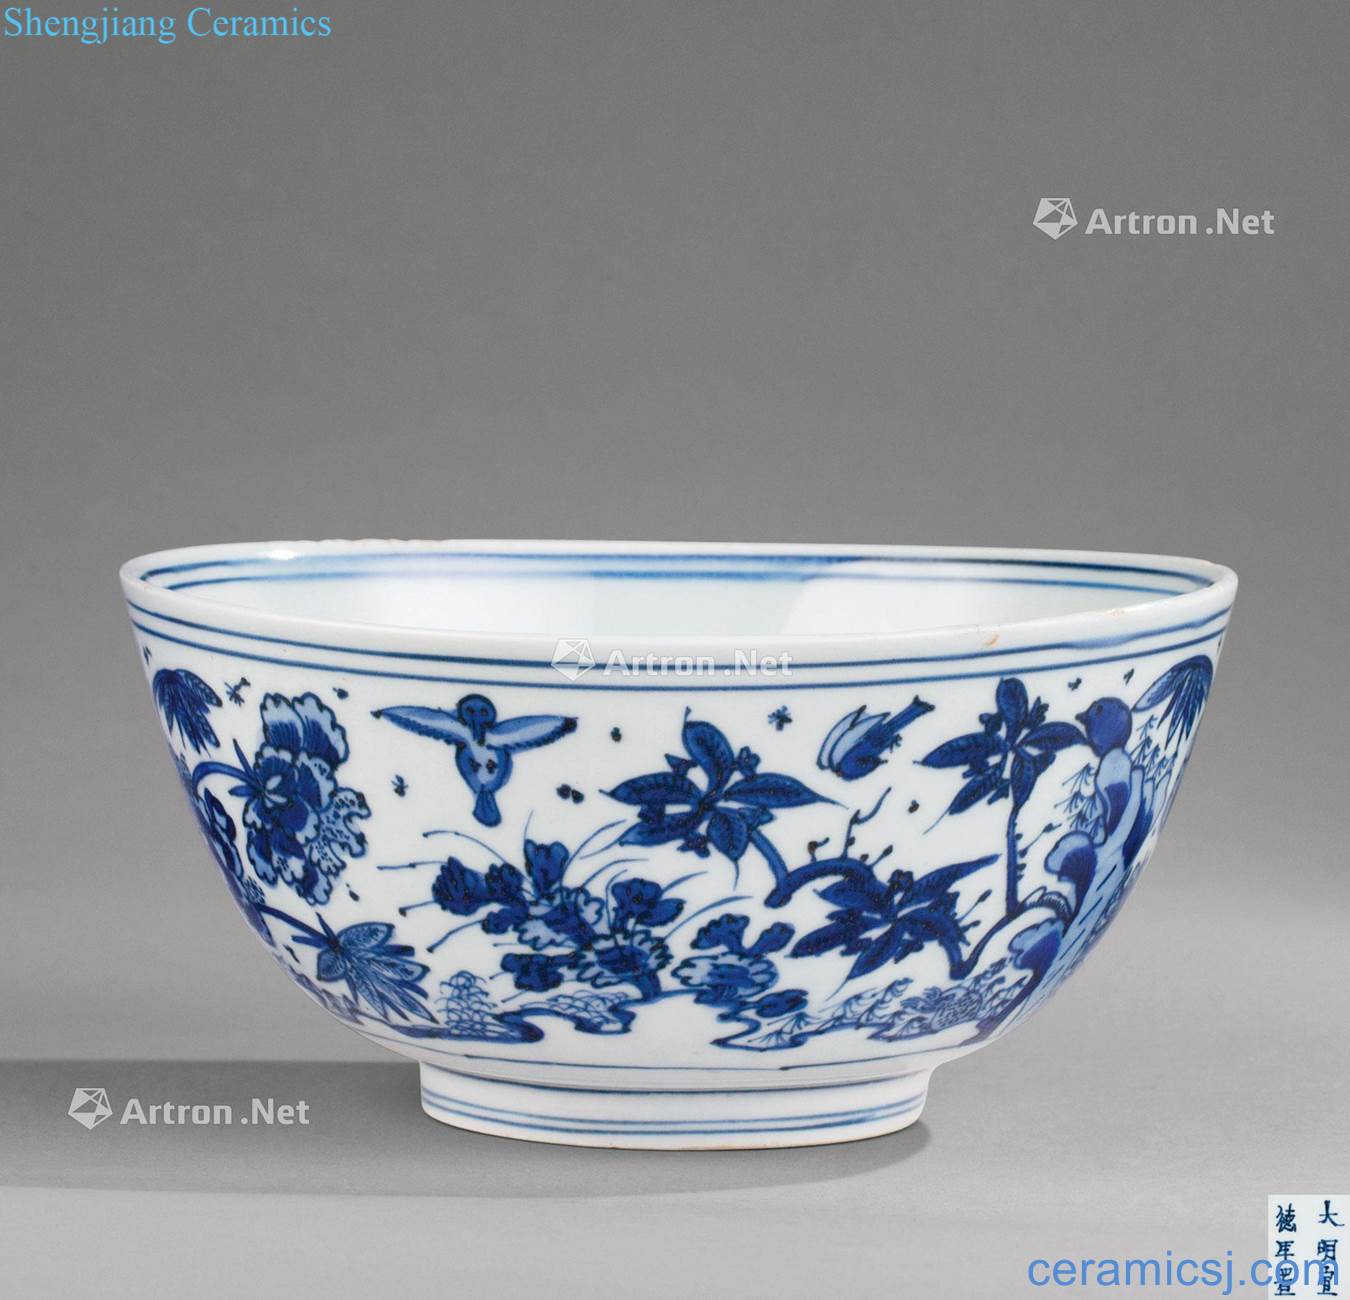 In the Ming dynasty (1368-1644) blue and white flowers and birds green-splashed bowls